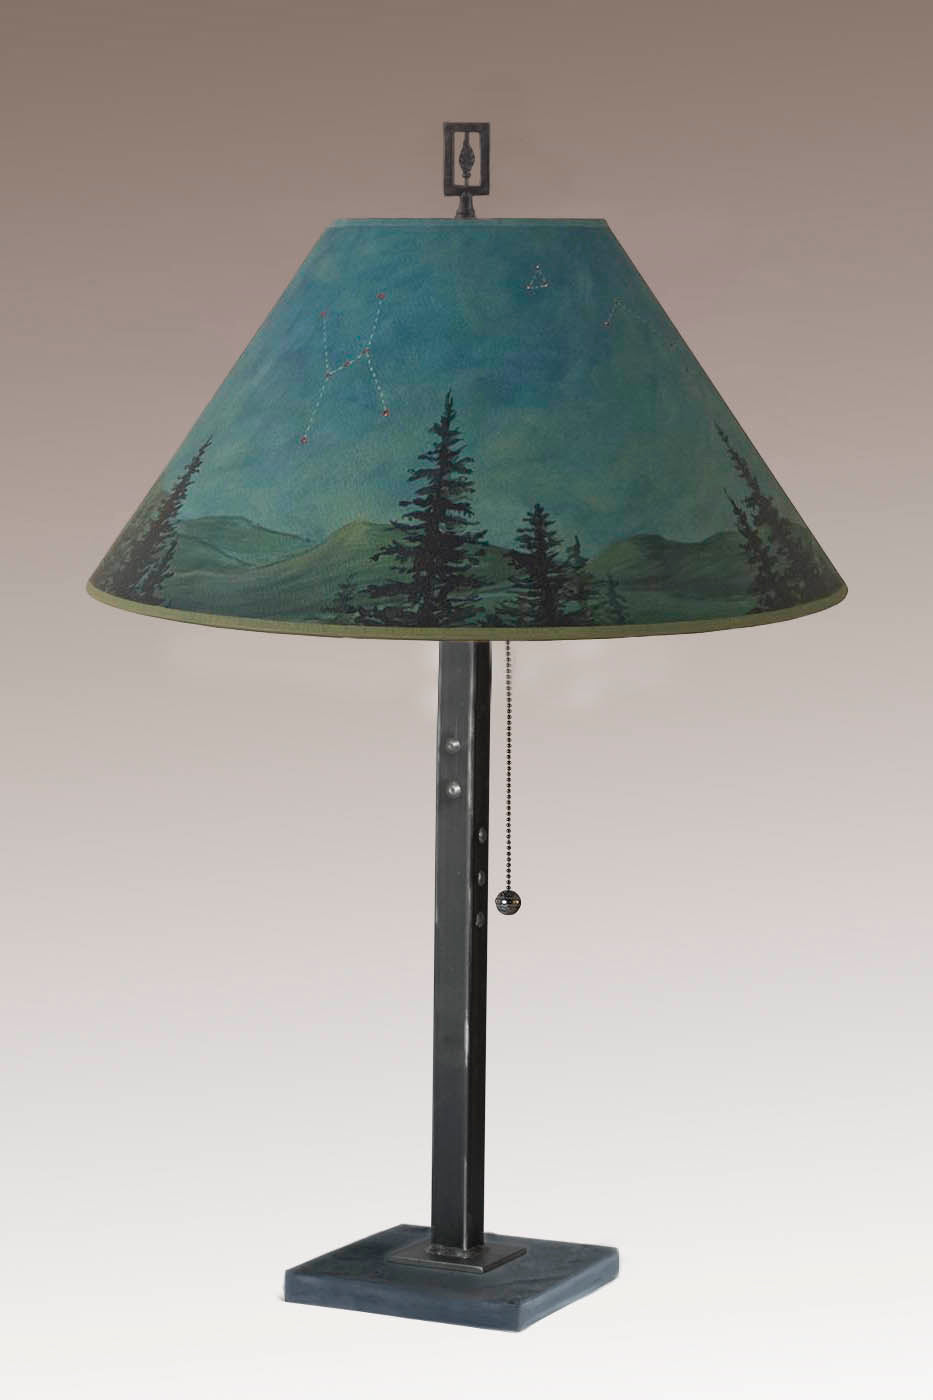 Janna Ugone &amp; Co Table Lamp Steel Table Lamp with Large Conical Shade in Midnight Sky